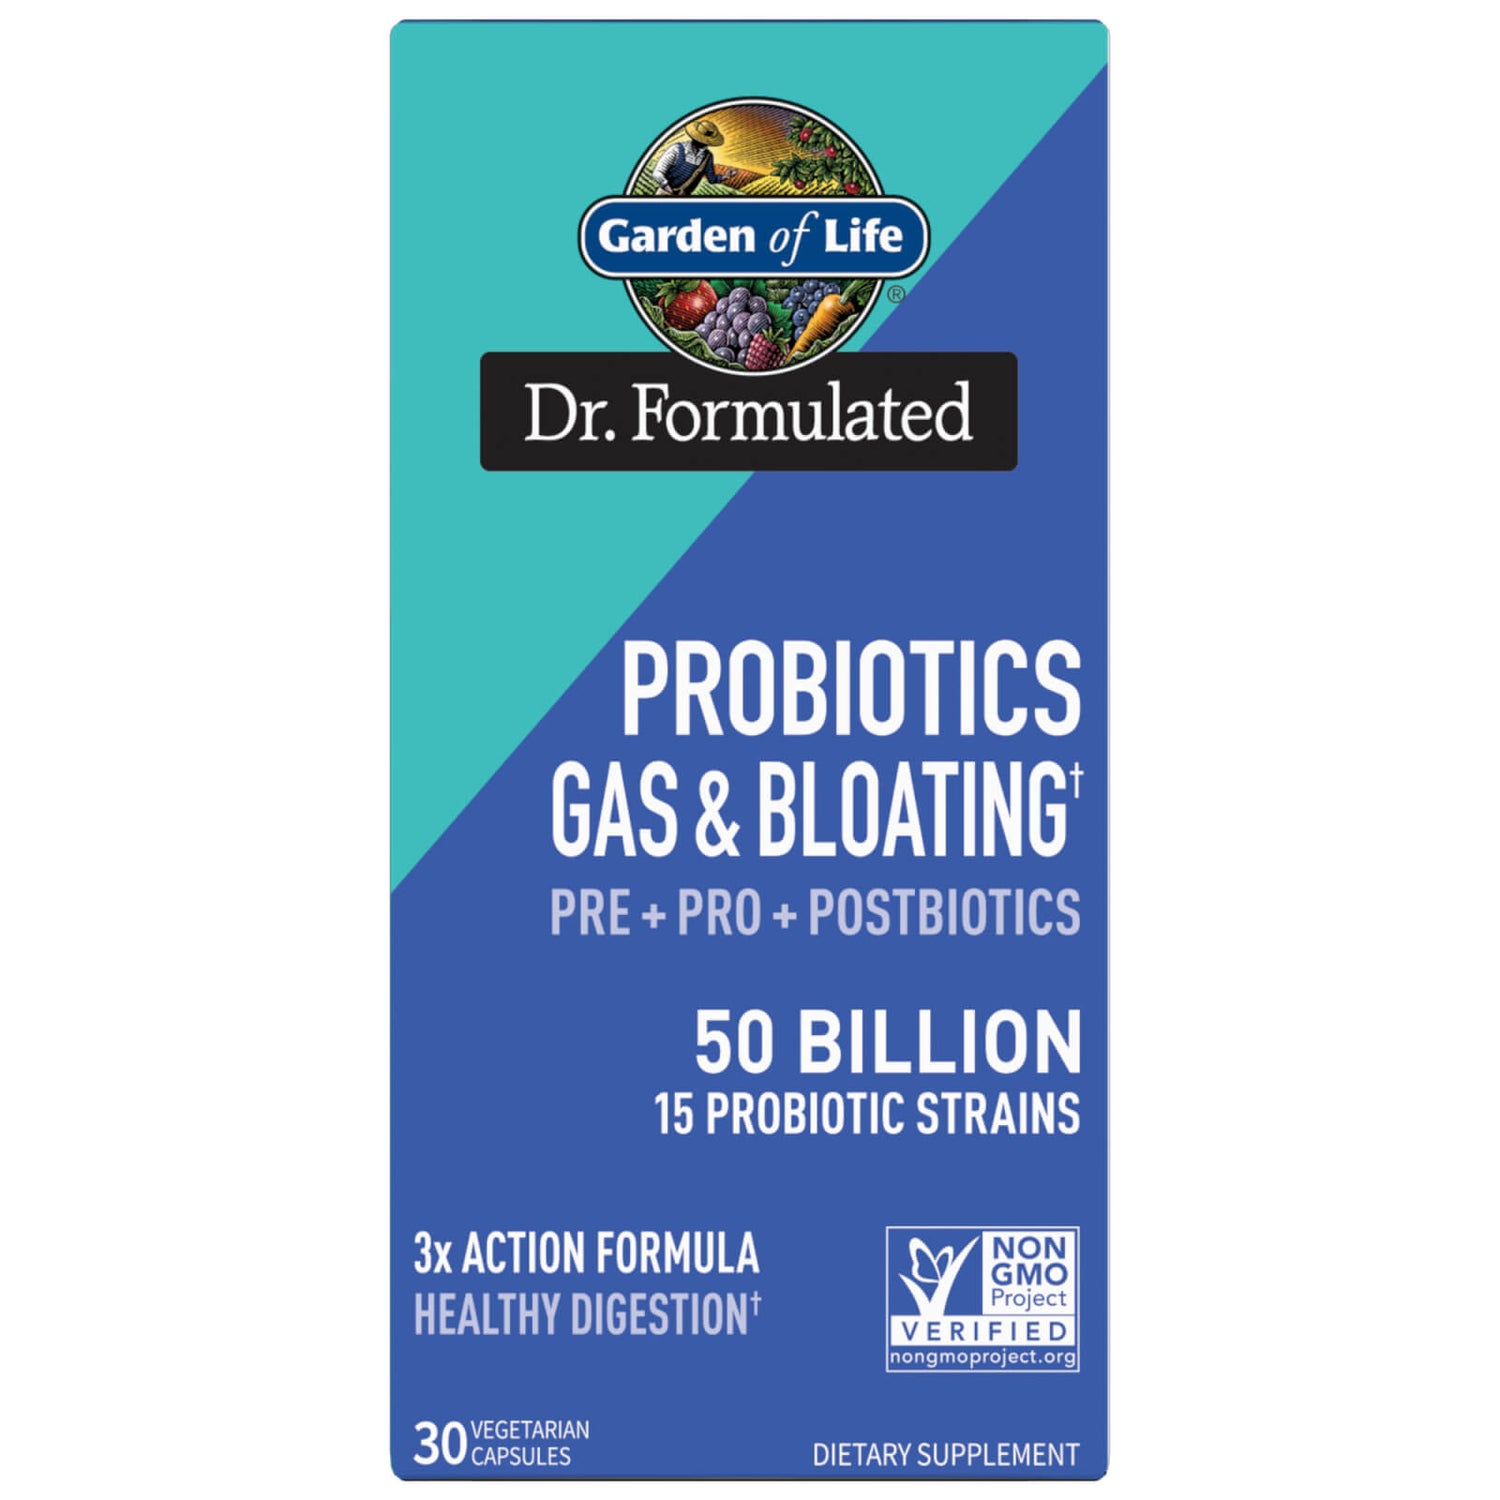 Dr. Formulated Microbiome Gas + Bloating Pre+Pro+Postbiotics 50B